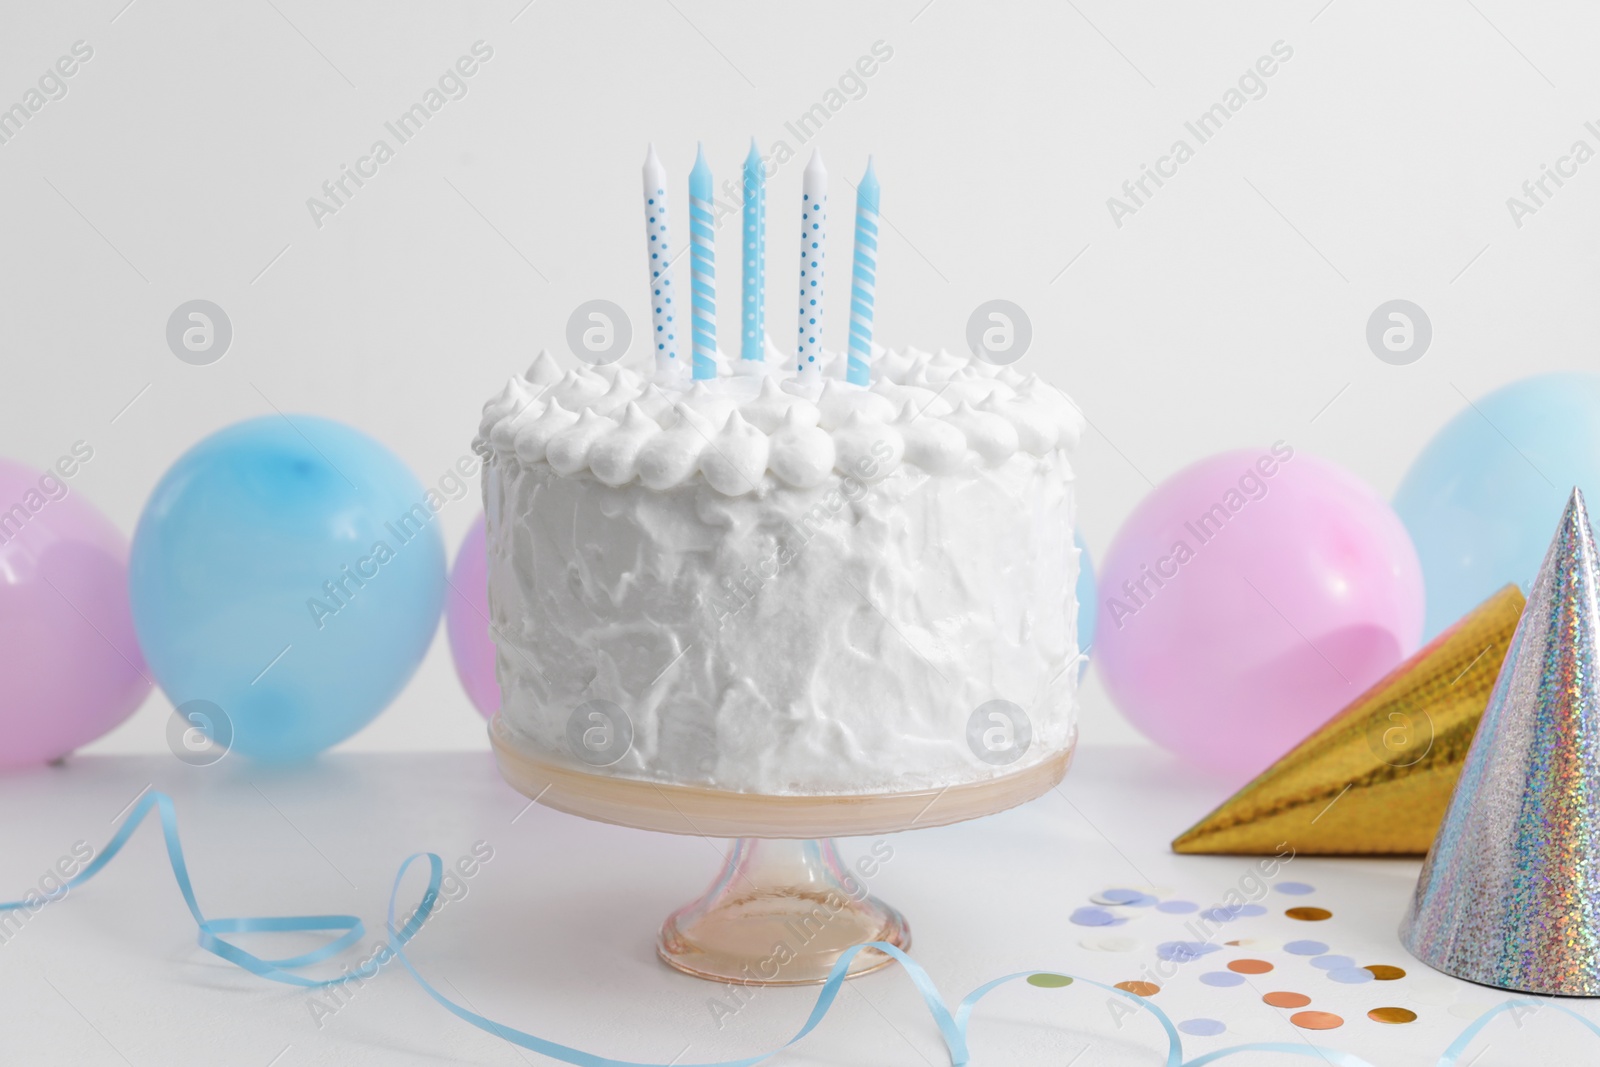 Photo of Delicious cake with candles and decorations on white table